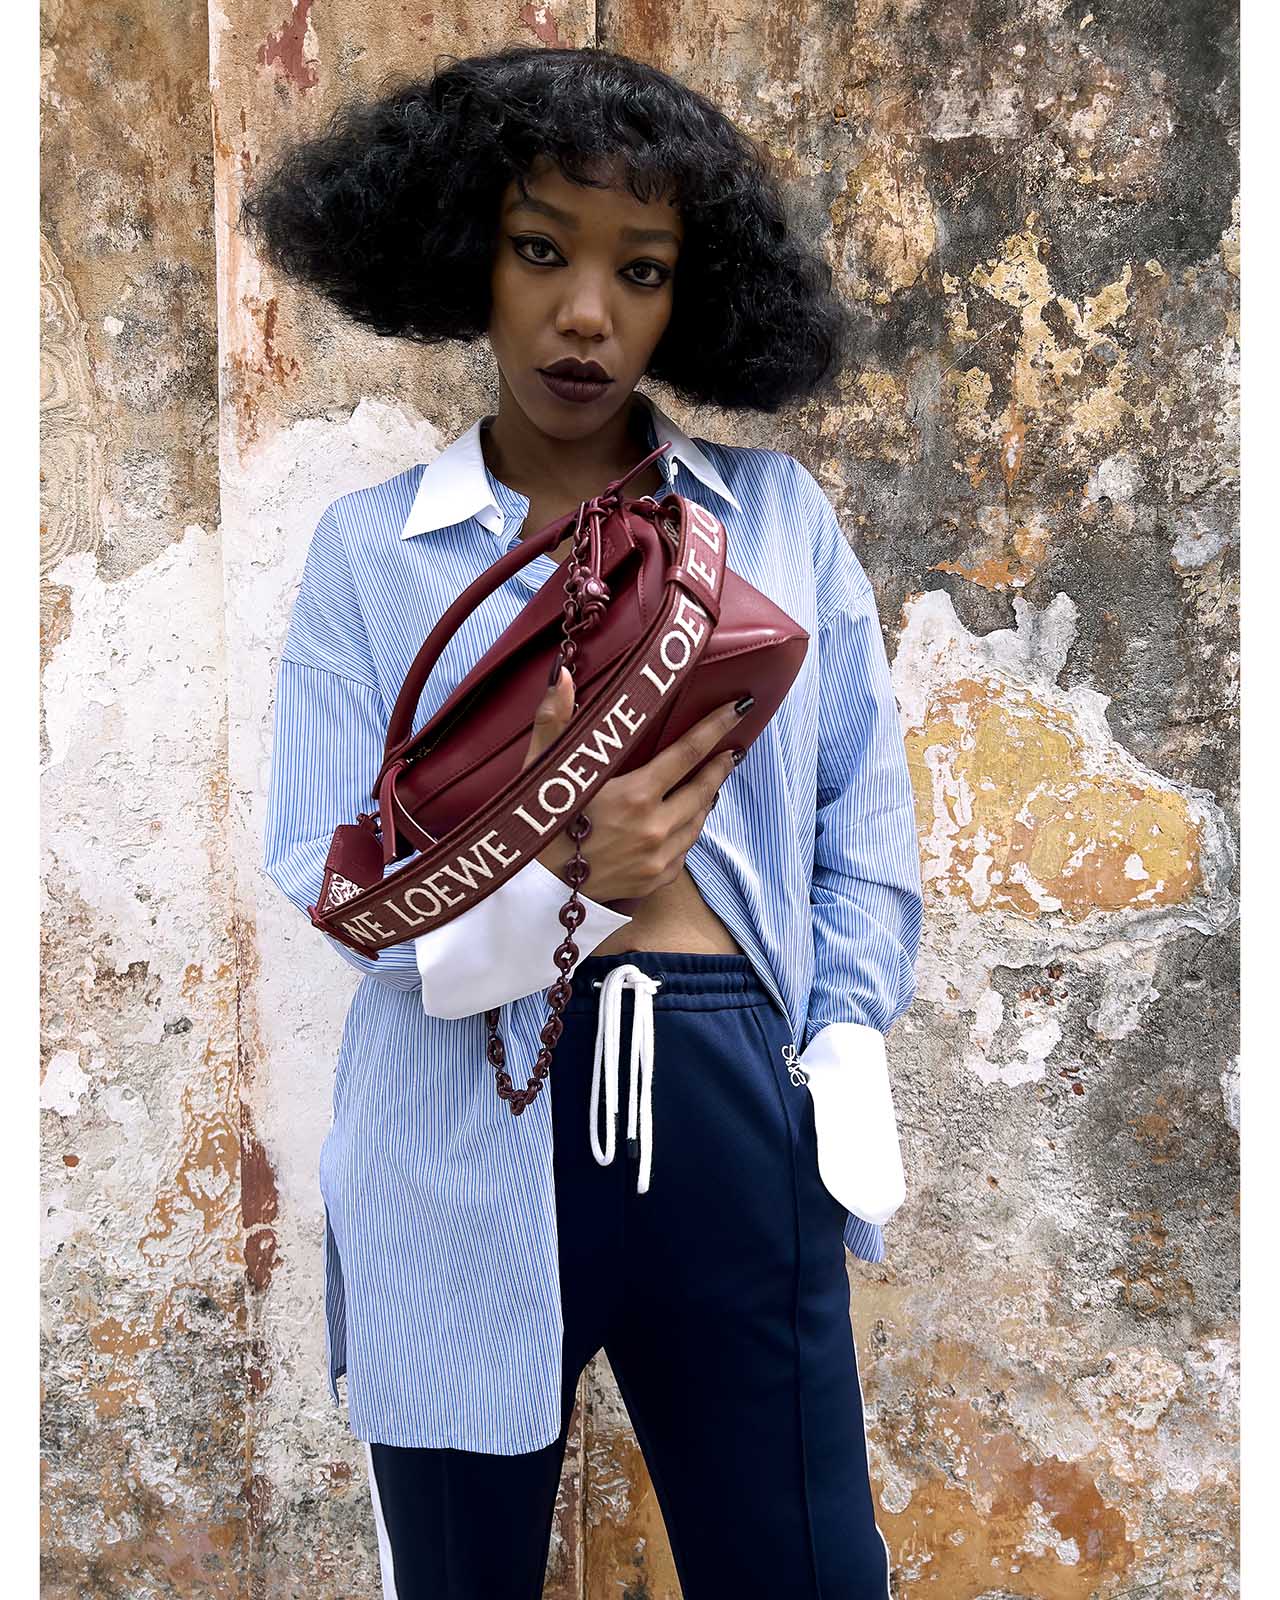 LOEWE Pre-Collection SS23 Campaign Shot by Jurgen Teller